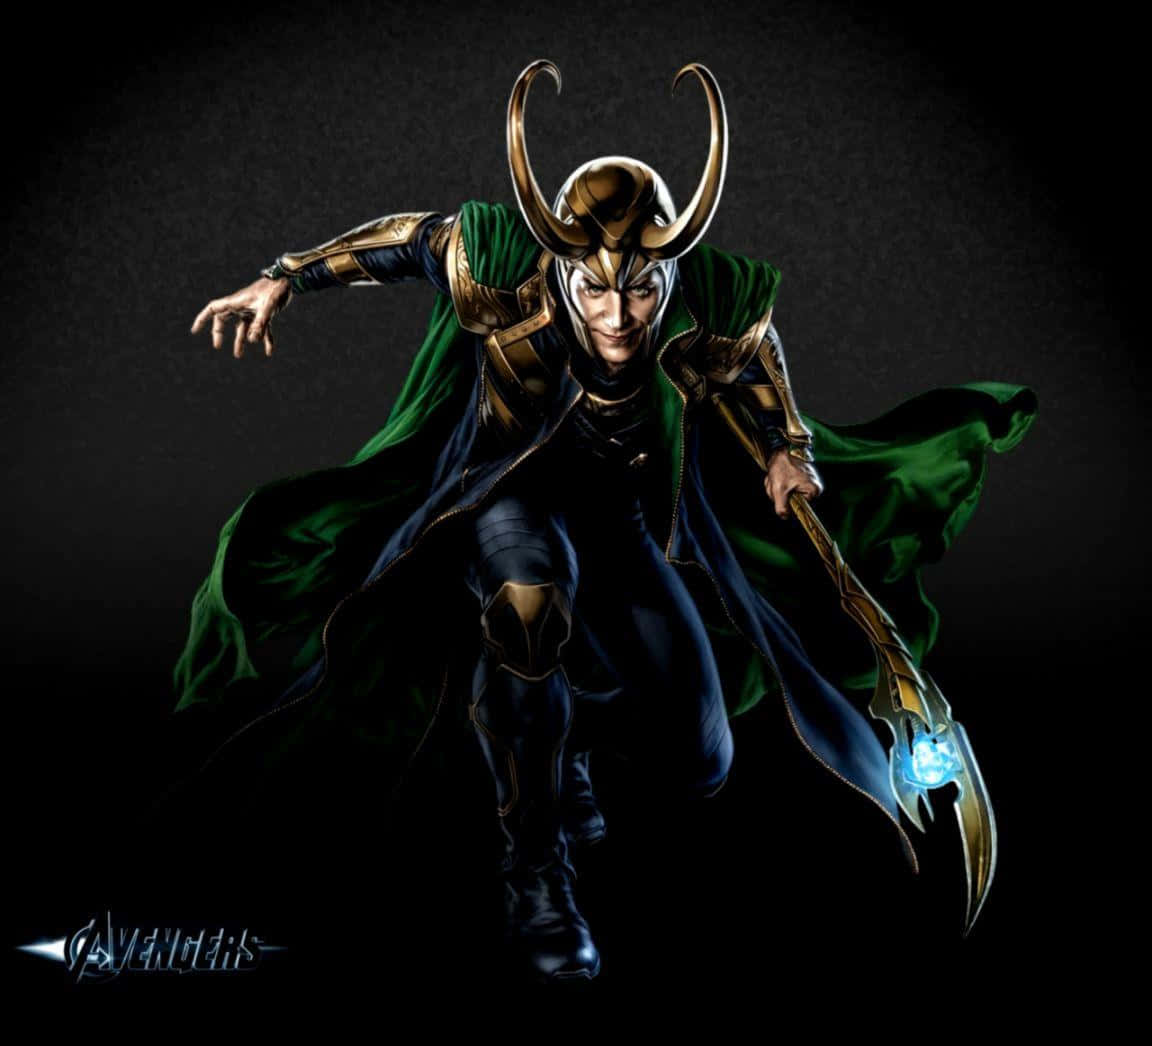 The God of Mischief, Loki, in his captivating appearance